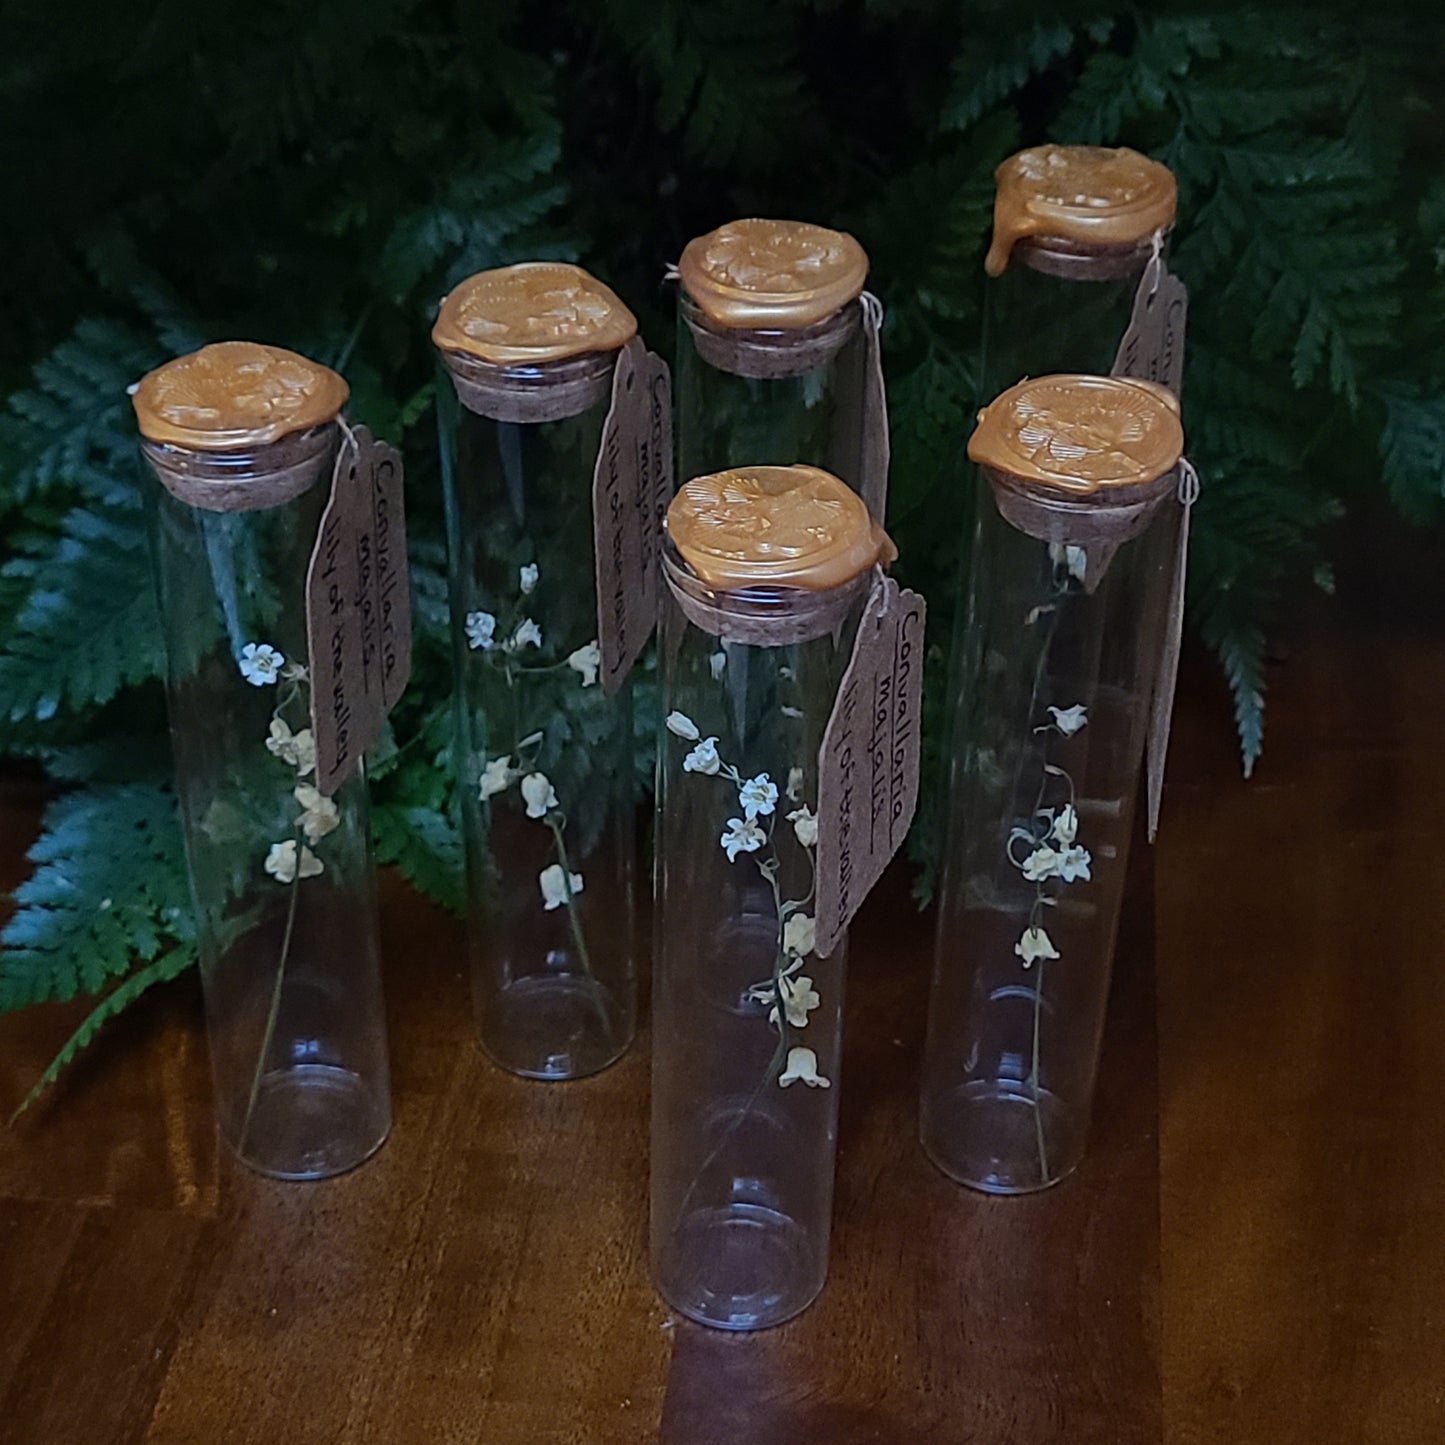 Lily of the Valley Specimen Vials